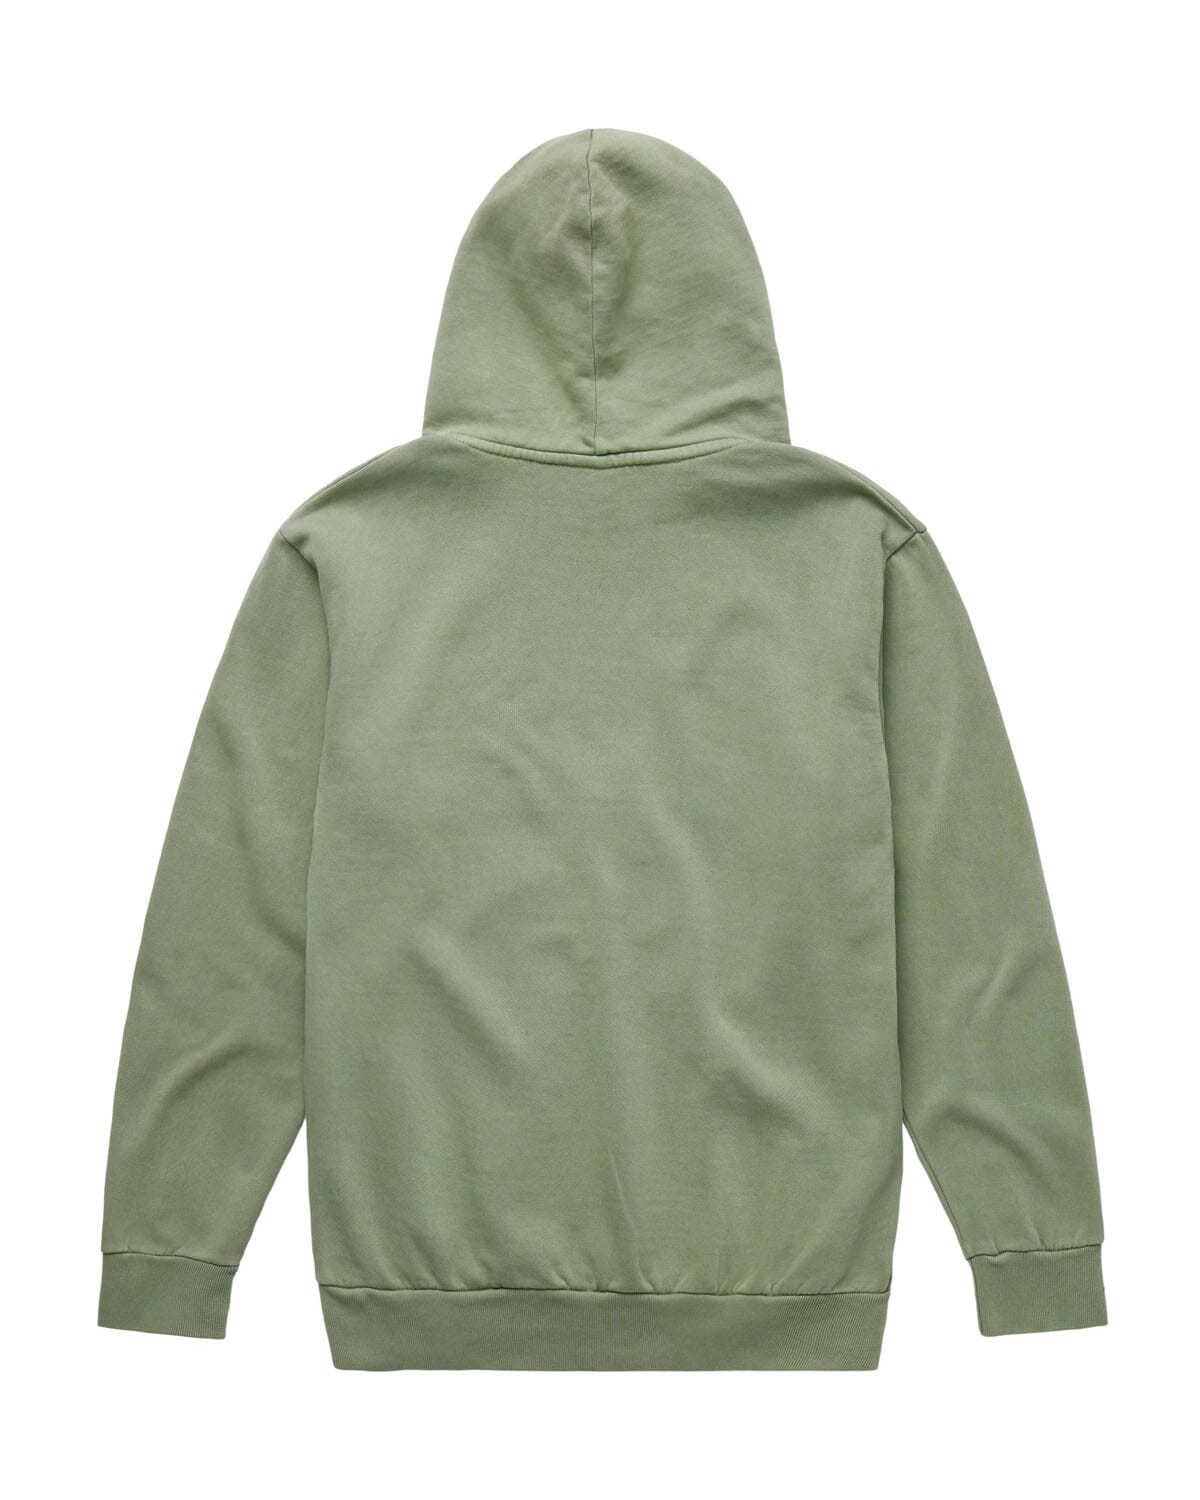 FS FORMS HOODIE OIL GREEN HOODIE FS FORMS 